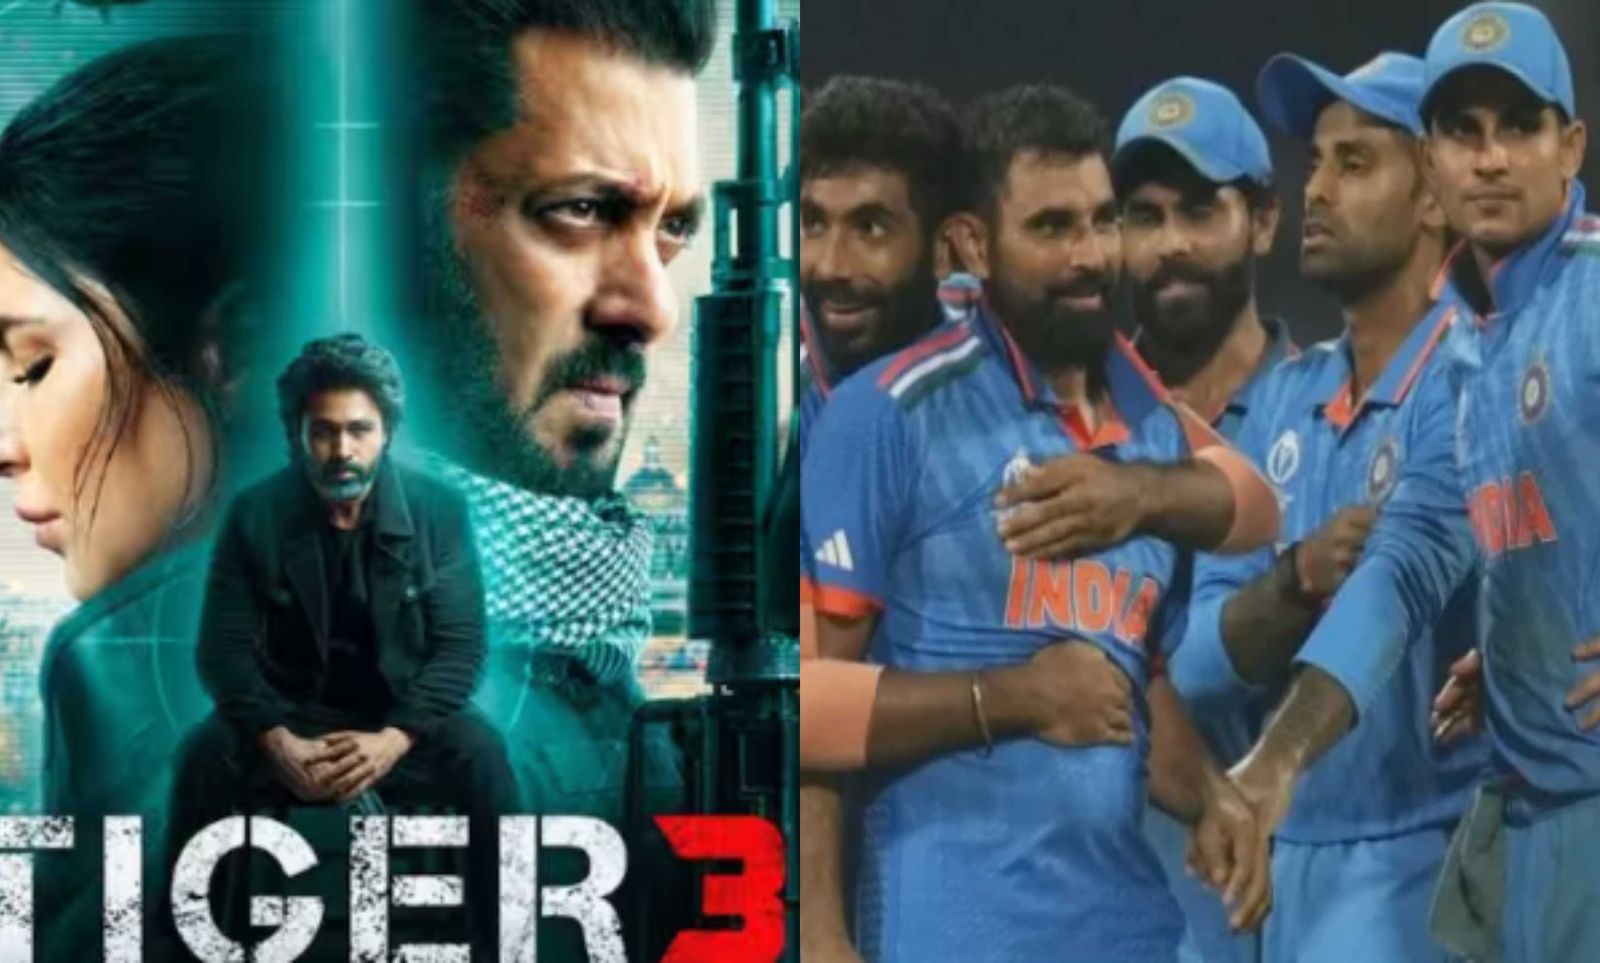 Tiger 3 Box Office Day 8 estimates: Salman Khan's spy thriller may face strong competition from World Cup 2023 Final